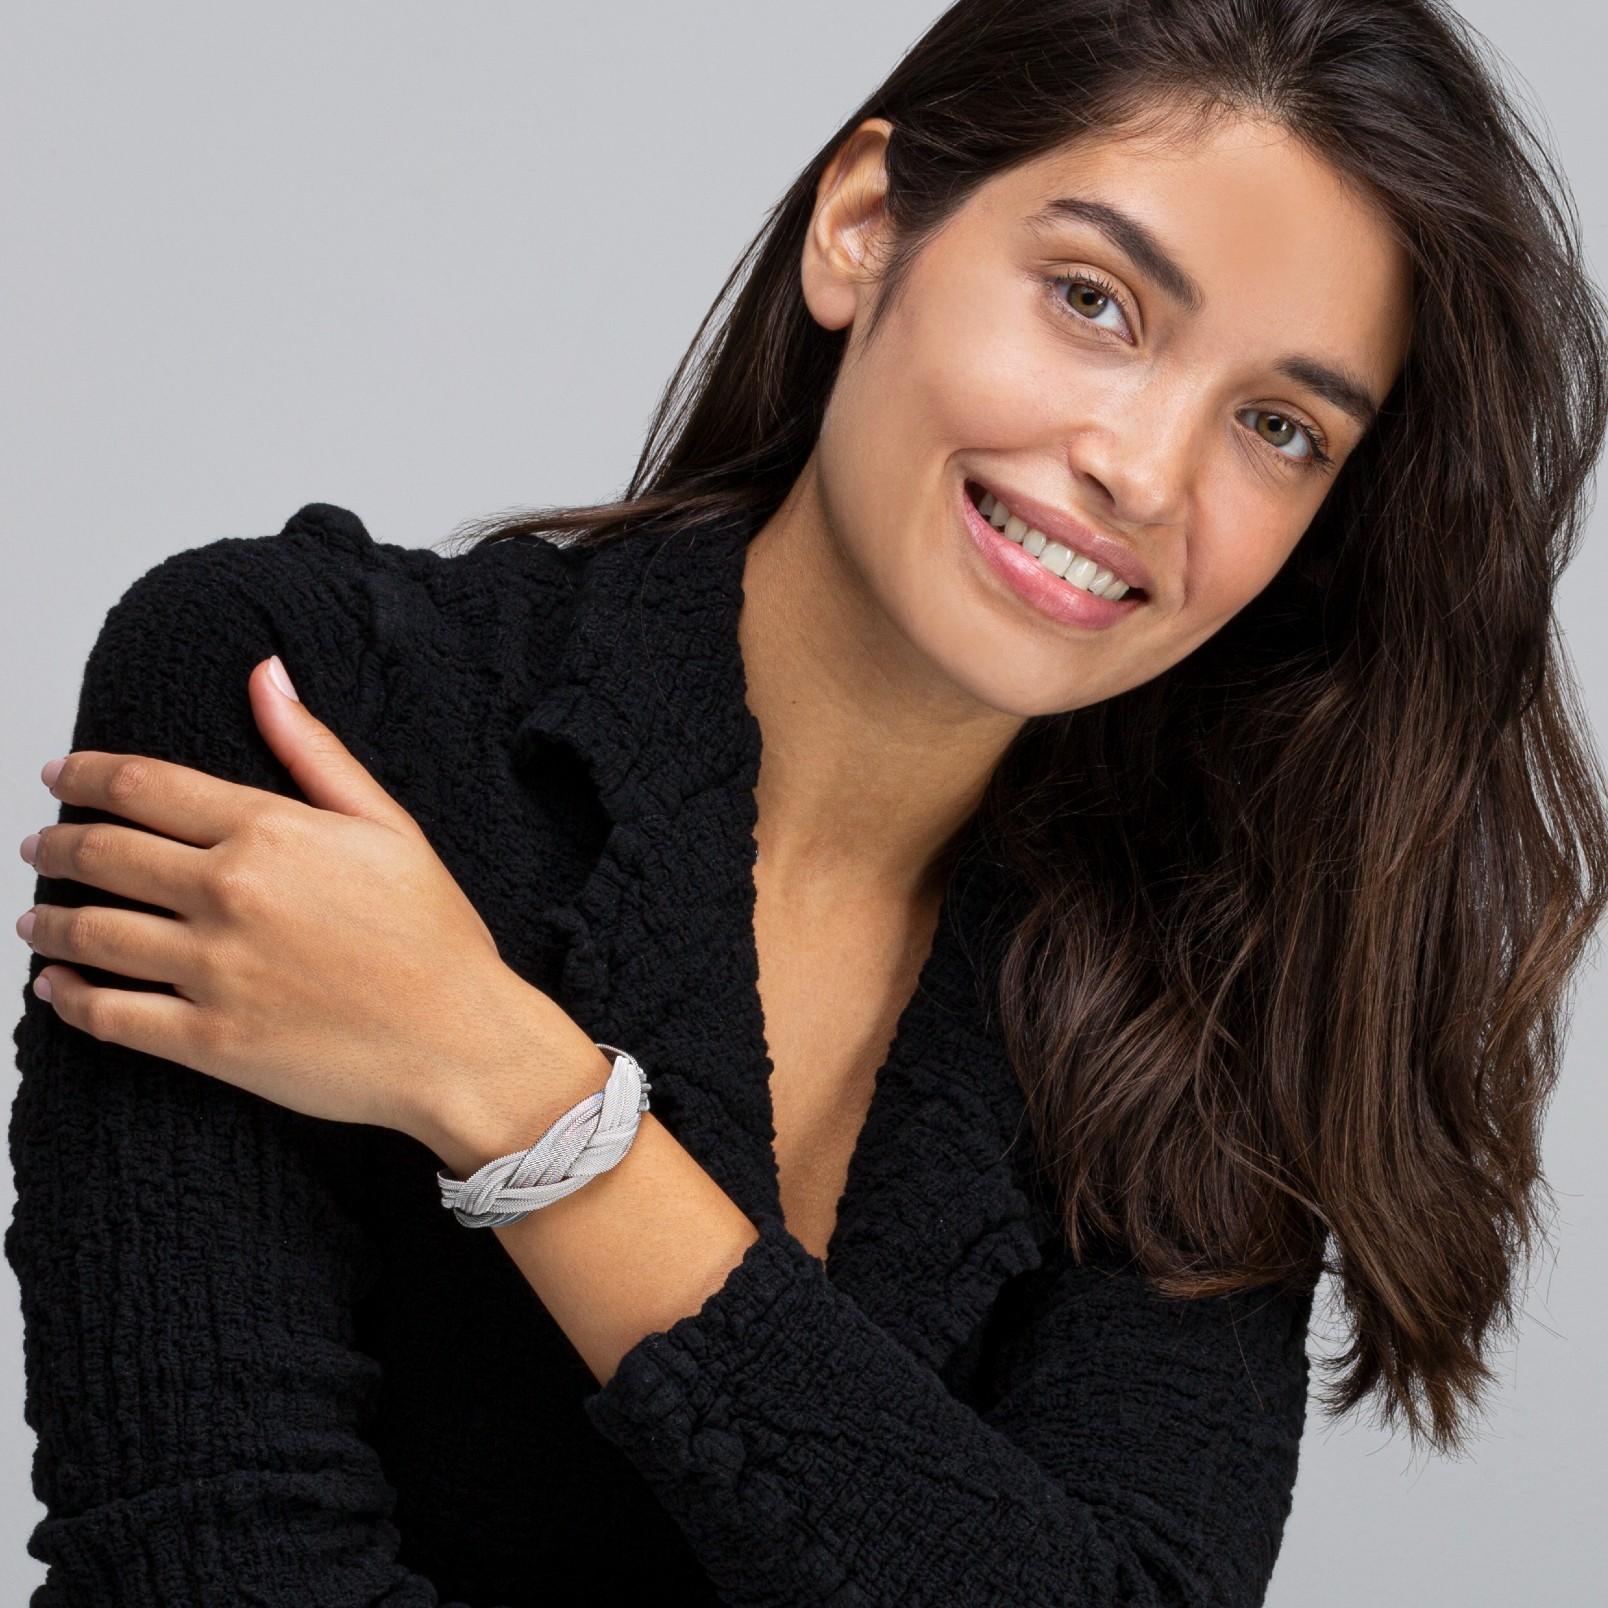 Alex Jona design collection, hand crafted in Italy, sterling silver woven plissé tress bracelet. Marked Alex Jona.
Alex Jona jewels stand out, not only for their special design and for the excellent quality of the gemstones, but also for the careful